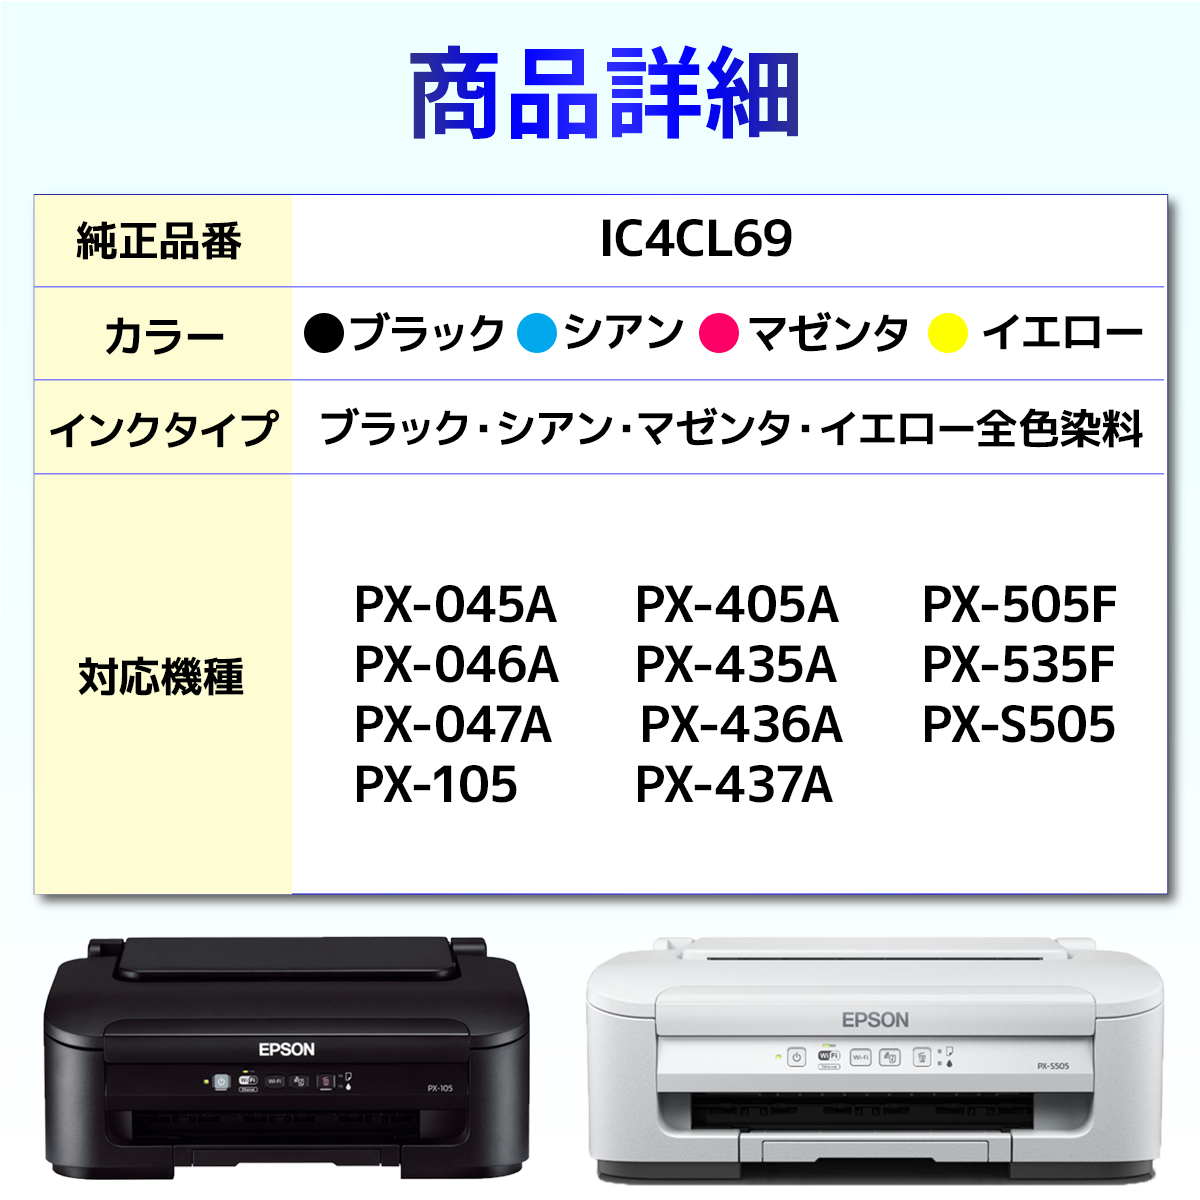 IC4CL69 IC69 互換 インク 砂時計 5個セット EPSON エプソン PX-045A PX-046A PX-047A PX-105 PX-405A PX-435A PX-436A PX-437A PX-505F PX-535F PX-S505｜baustore｜03